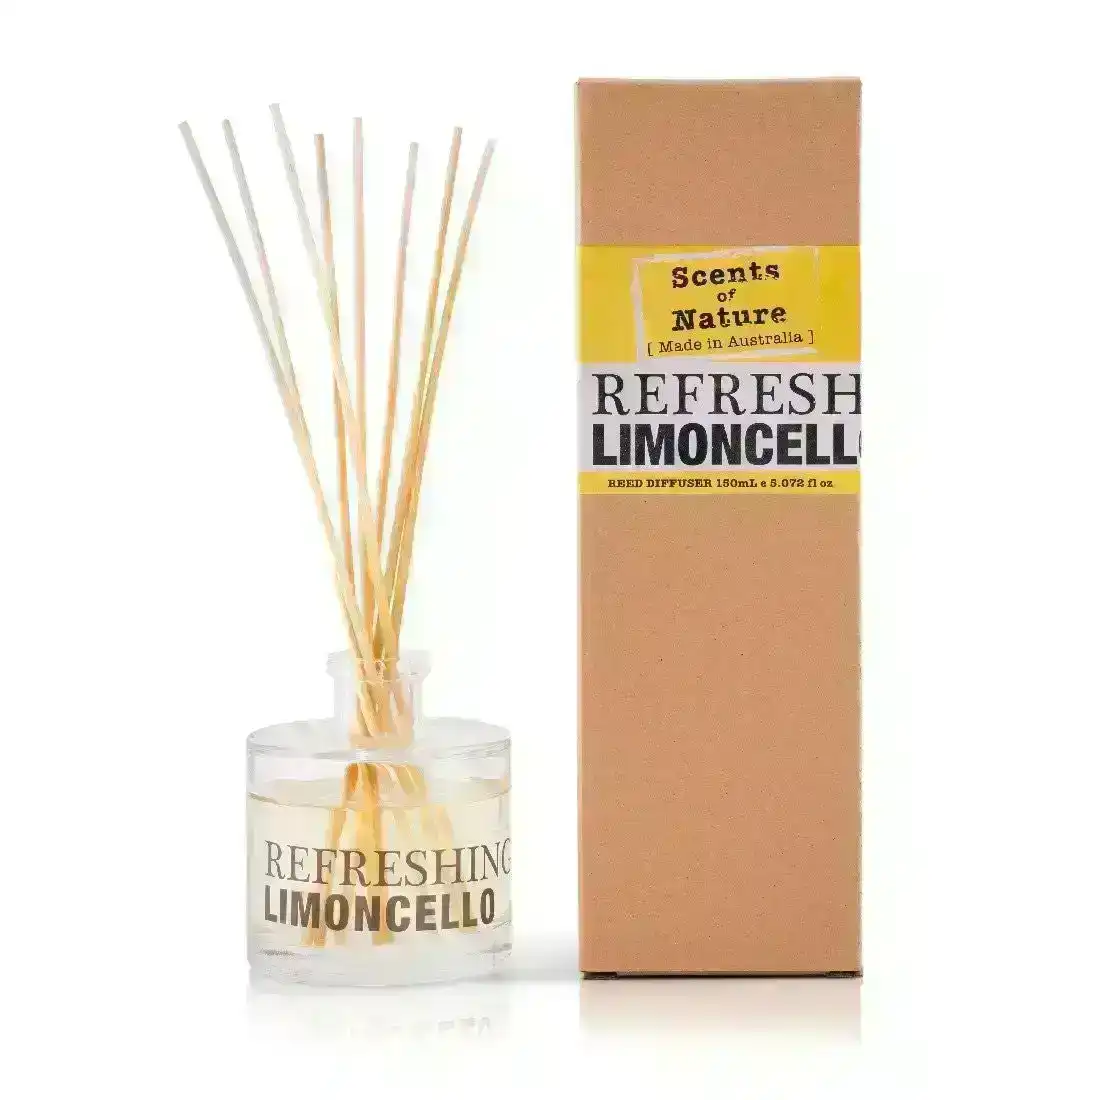 Tilley Scents Of Nature - Reed Diffuser 150ml - Refreshing Limoncello